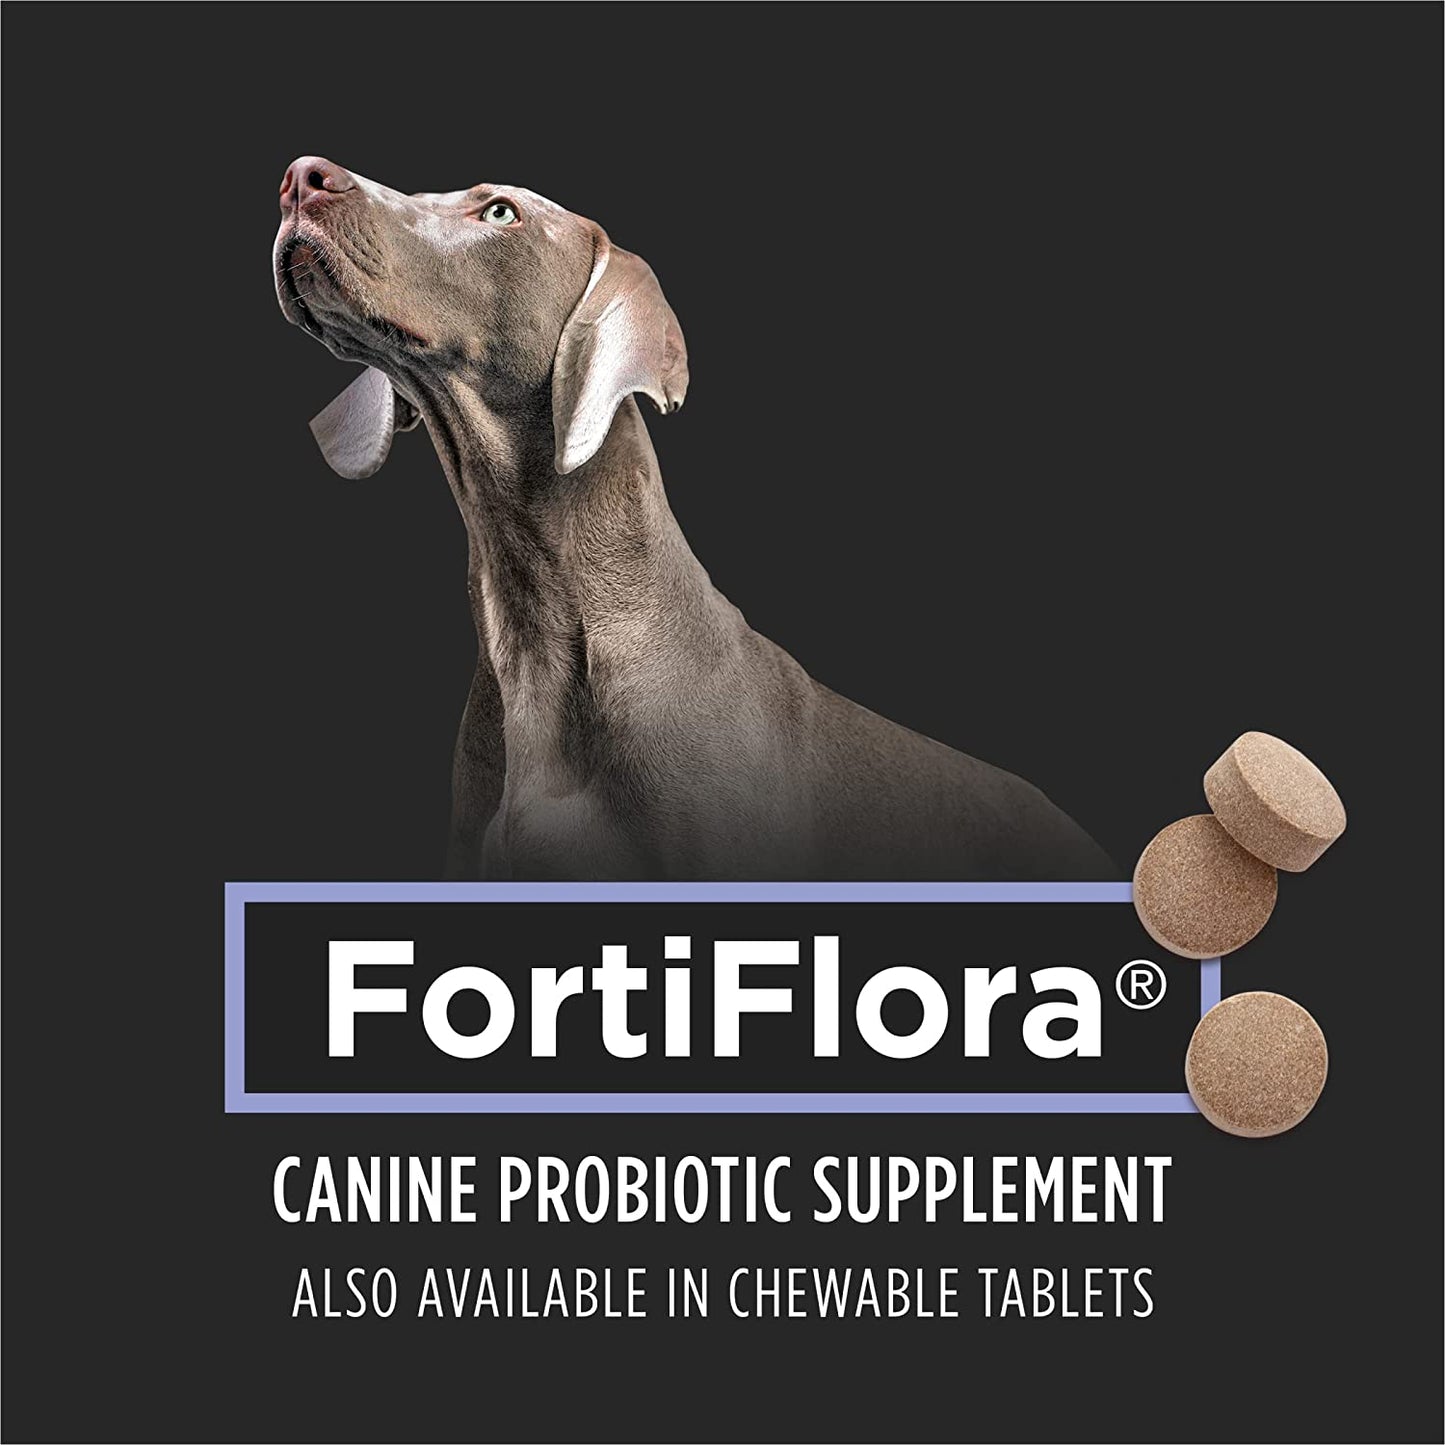 Purina Fortiflora Probiotics for Dogs, Pro Plan Veterinary Supplements Powder Probiotic Dog Supplement ,30 Count (Pack of 1)